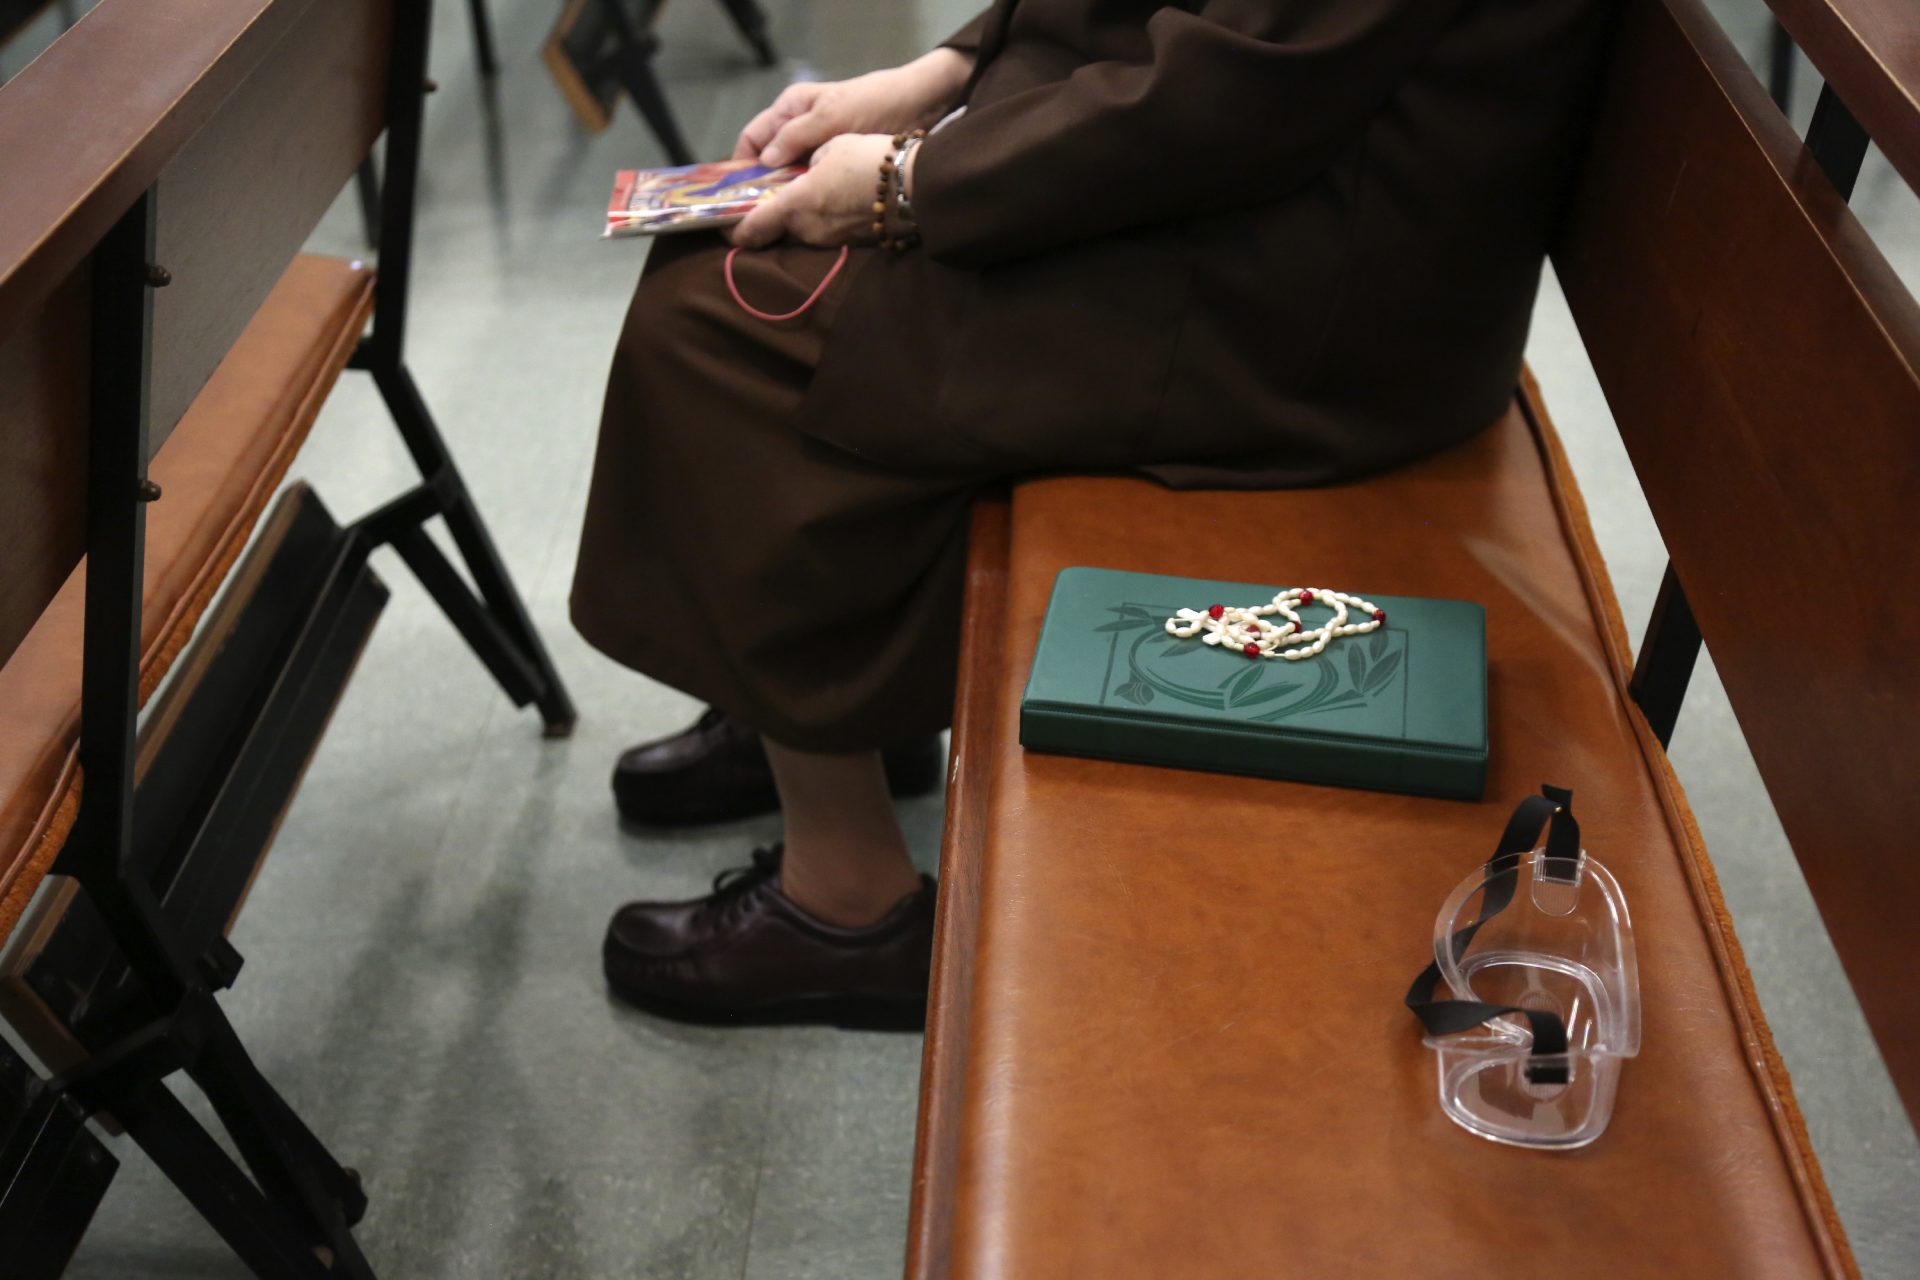 Sister Mary Carol Kardell, of the Felician Sisters of North America, sits beside a Bible, rosary beads and goggles during morning Mass at St. Anne Home in Greensburg, Pa., on Thursday, March 25, 2021. Last October the nuns lost one of their own, Sister Mary Evelyn Labik, to the coronavirus.